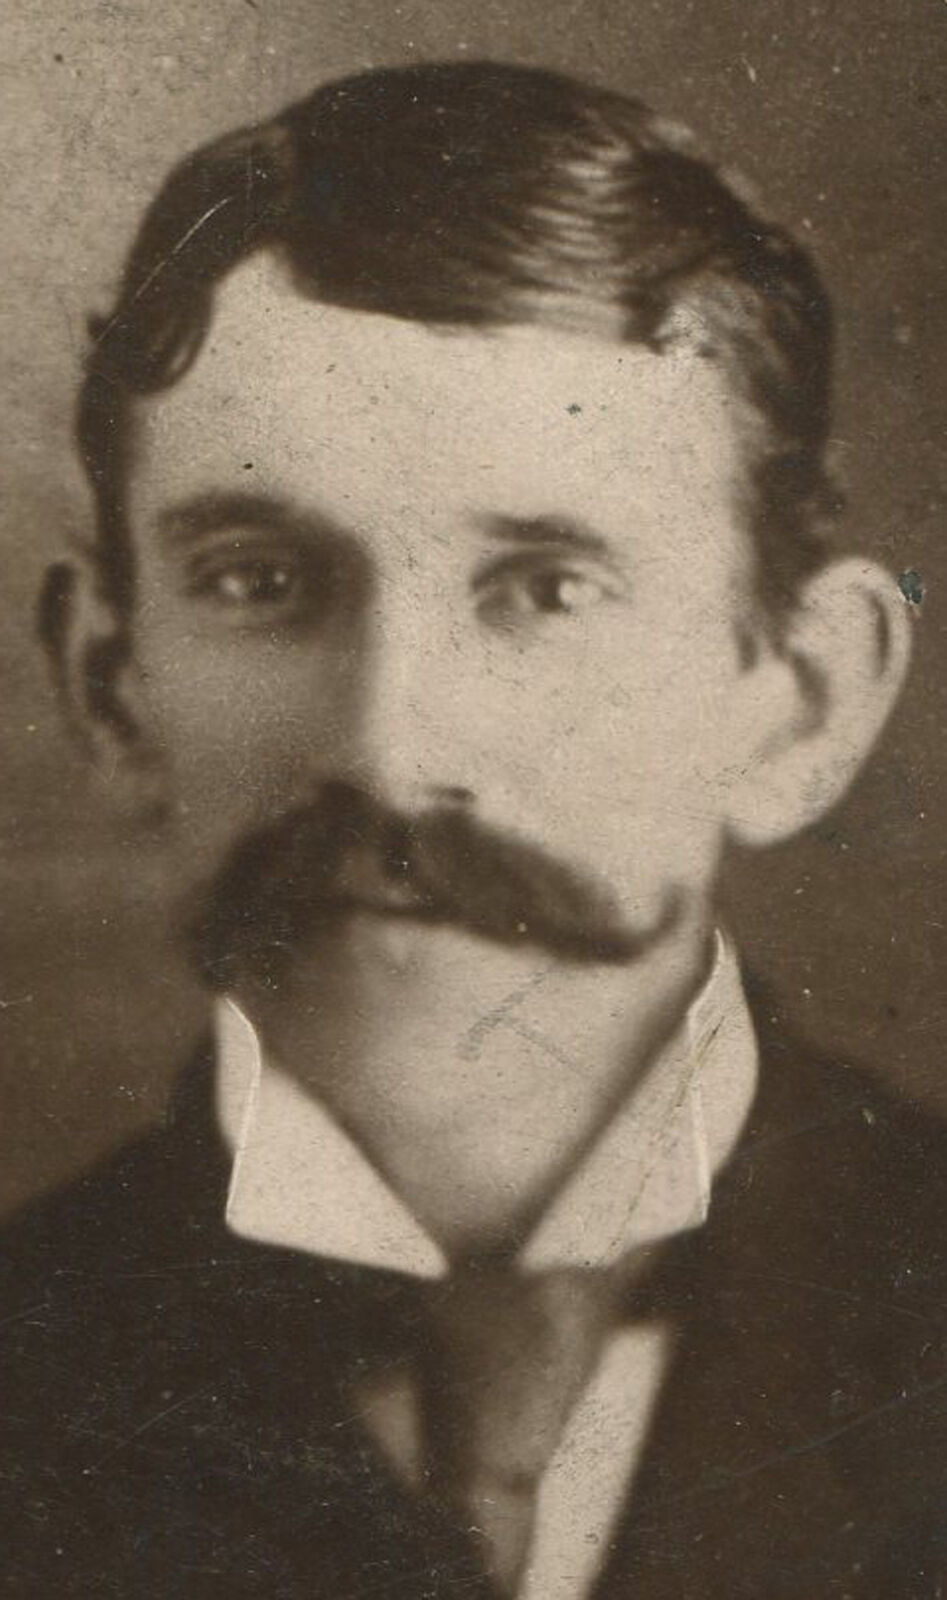 DASTARDLY LOOKING MAN WITH MUSTACHE. CABINET CARD. JOHNSTOWN, PA. 